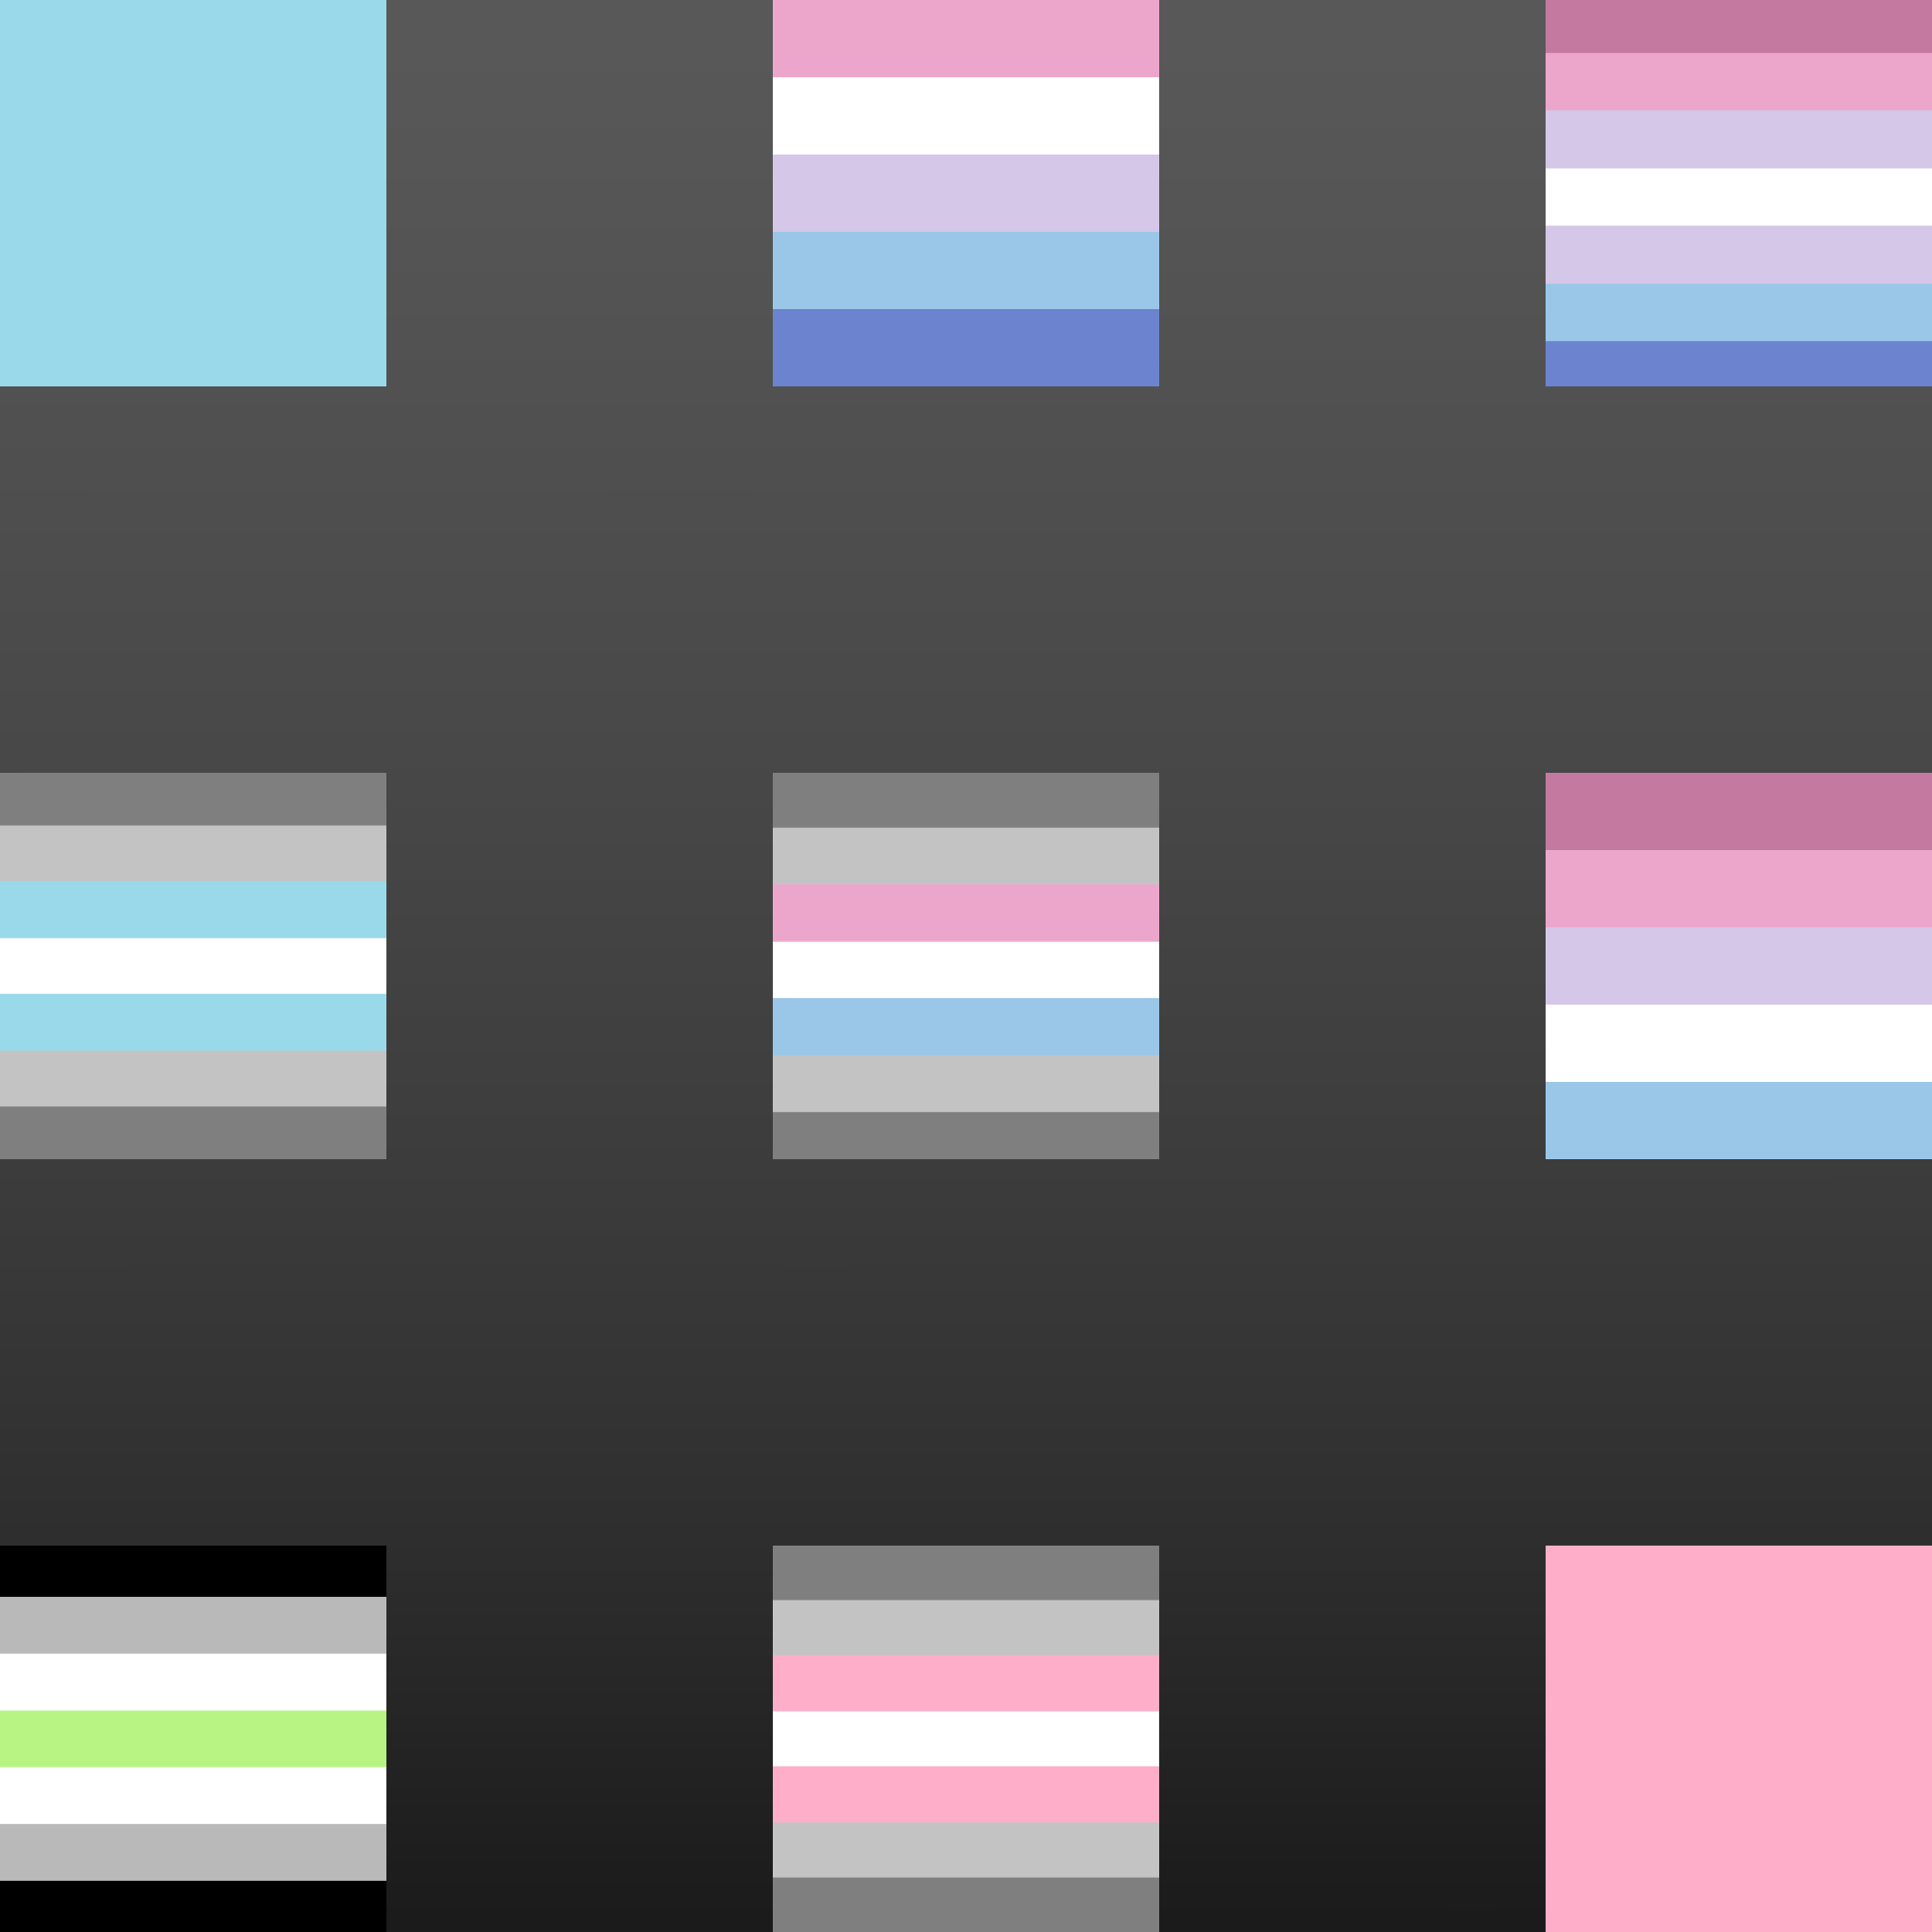 A 3x3 grid of flags showing combinations of varying amounts of male-ness and varying amounts of female-ness, including my flag designs for the entries without popular flags.